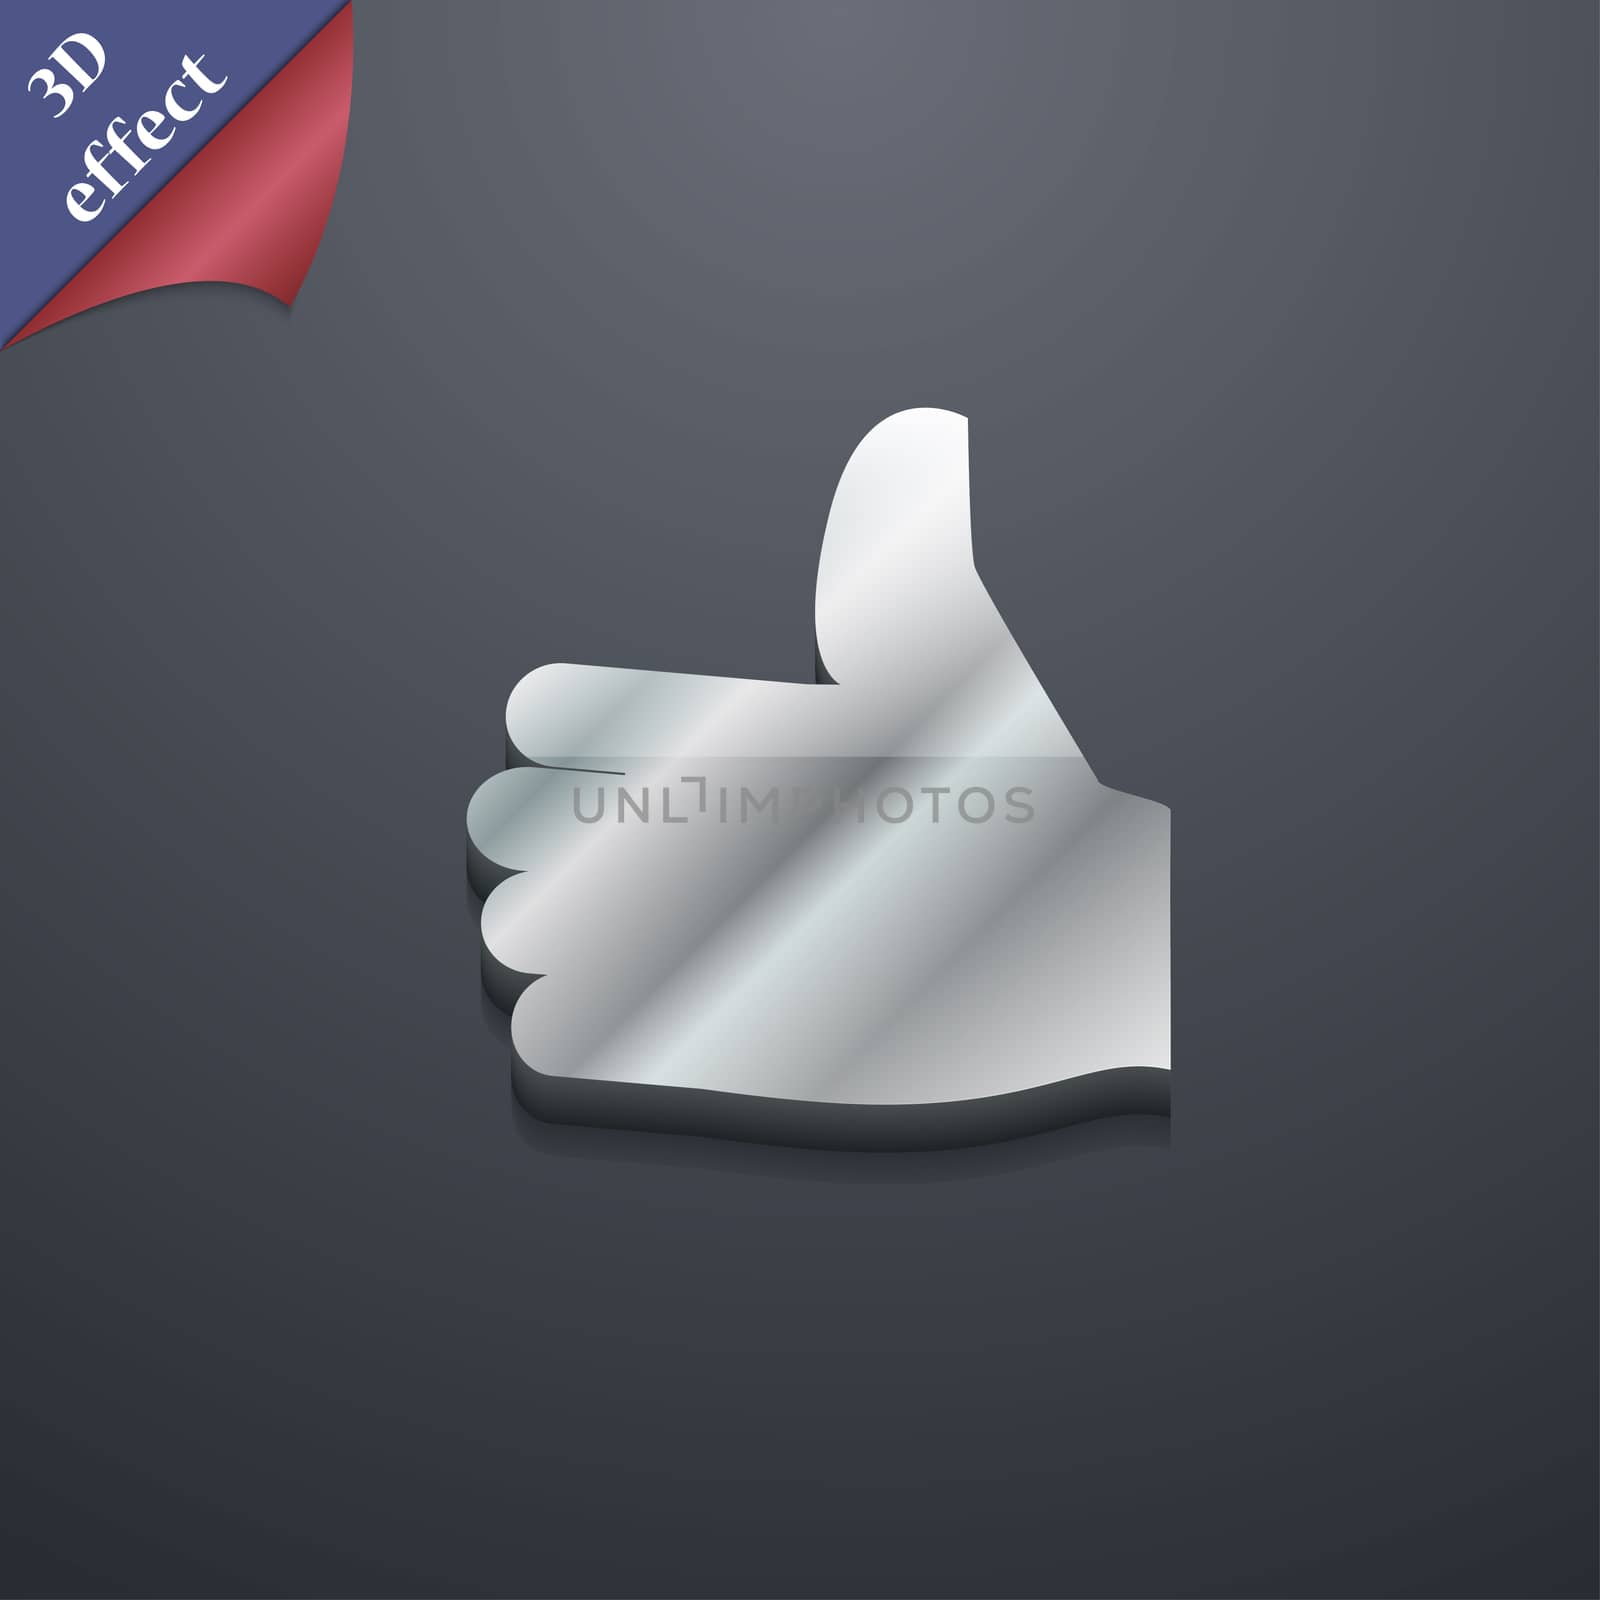 Like, Thumb up icon symbol. 3D style. Trendy, modern design with space for your text illustration. Rastrized copy